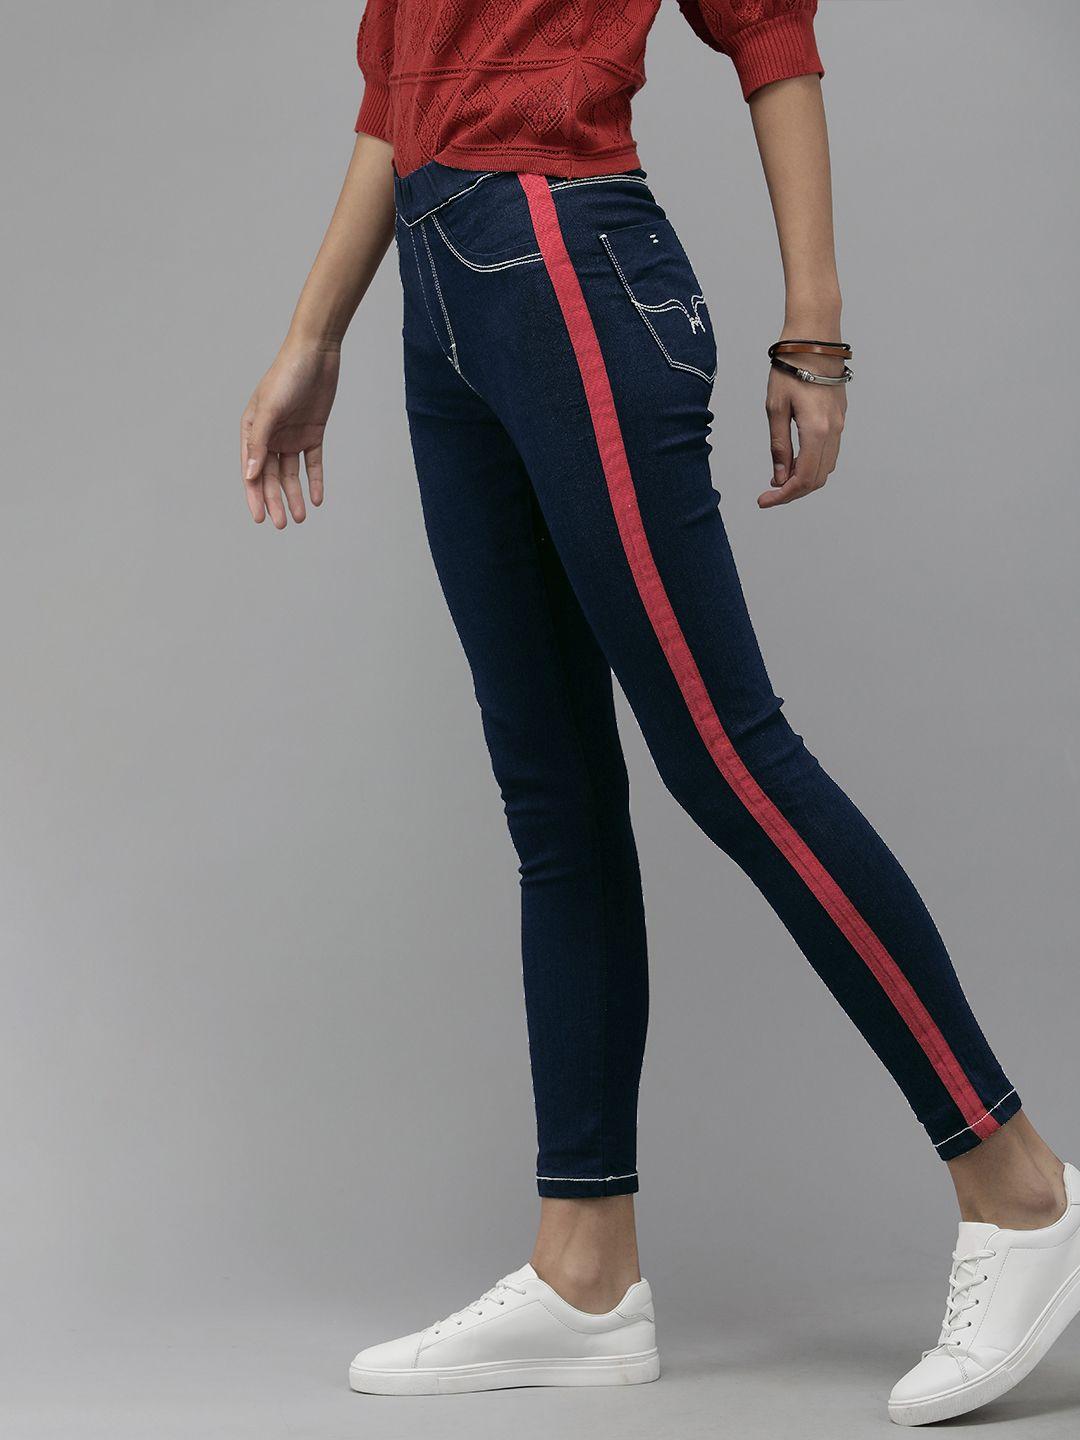 roadster-women-navy-blue-&-red-side-taped-ankle-length-skinny-fit-jeggings